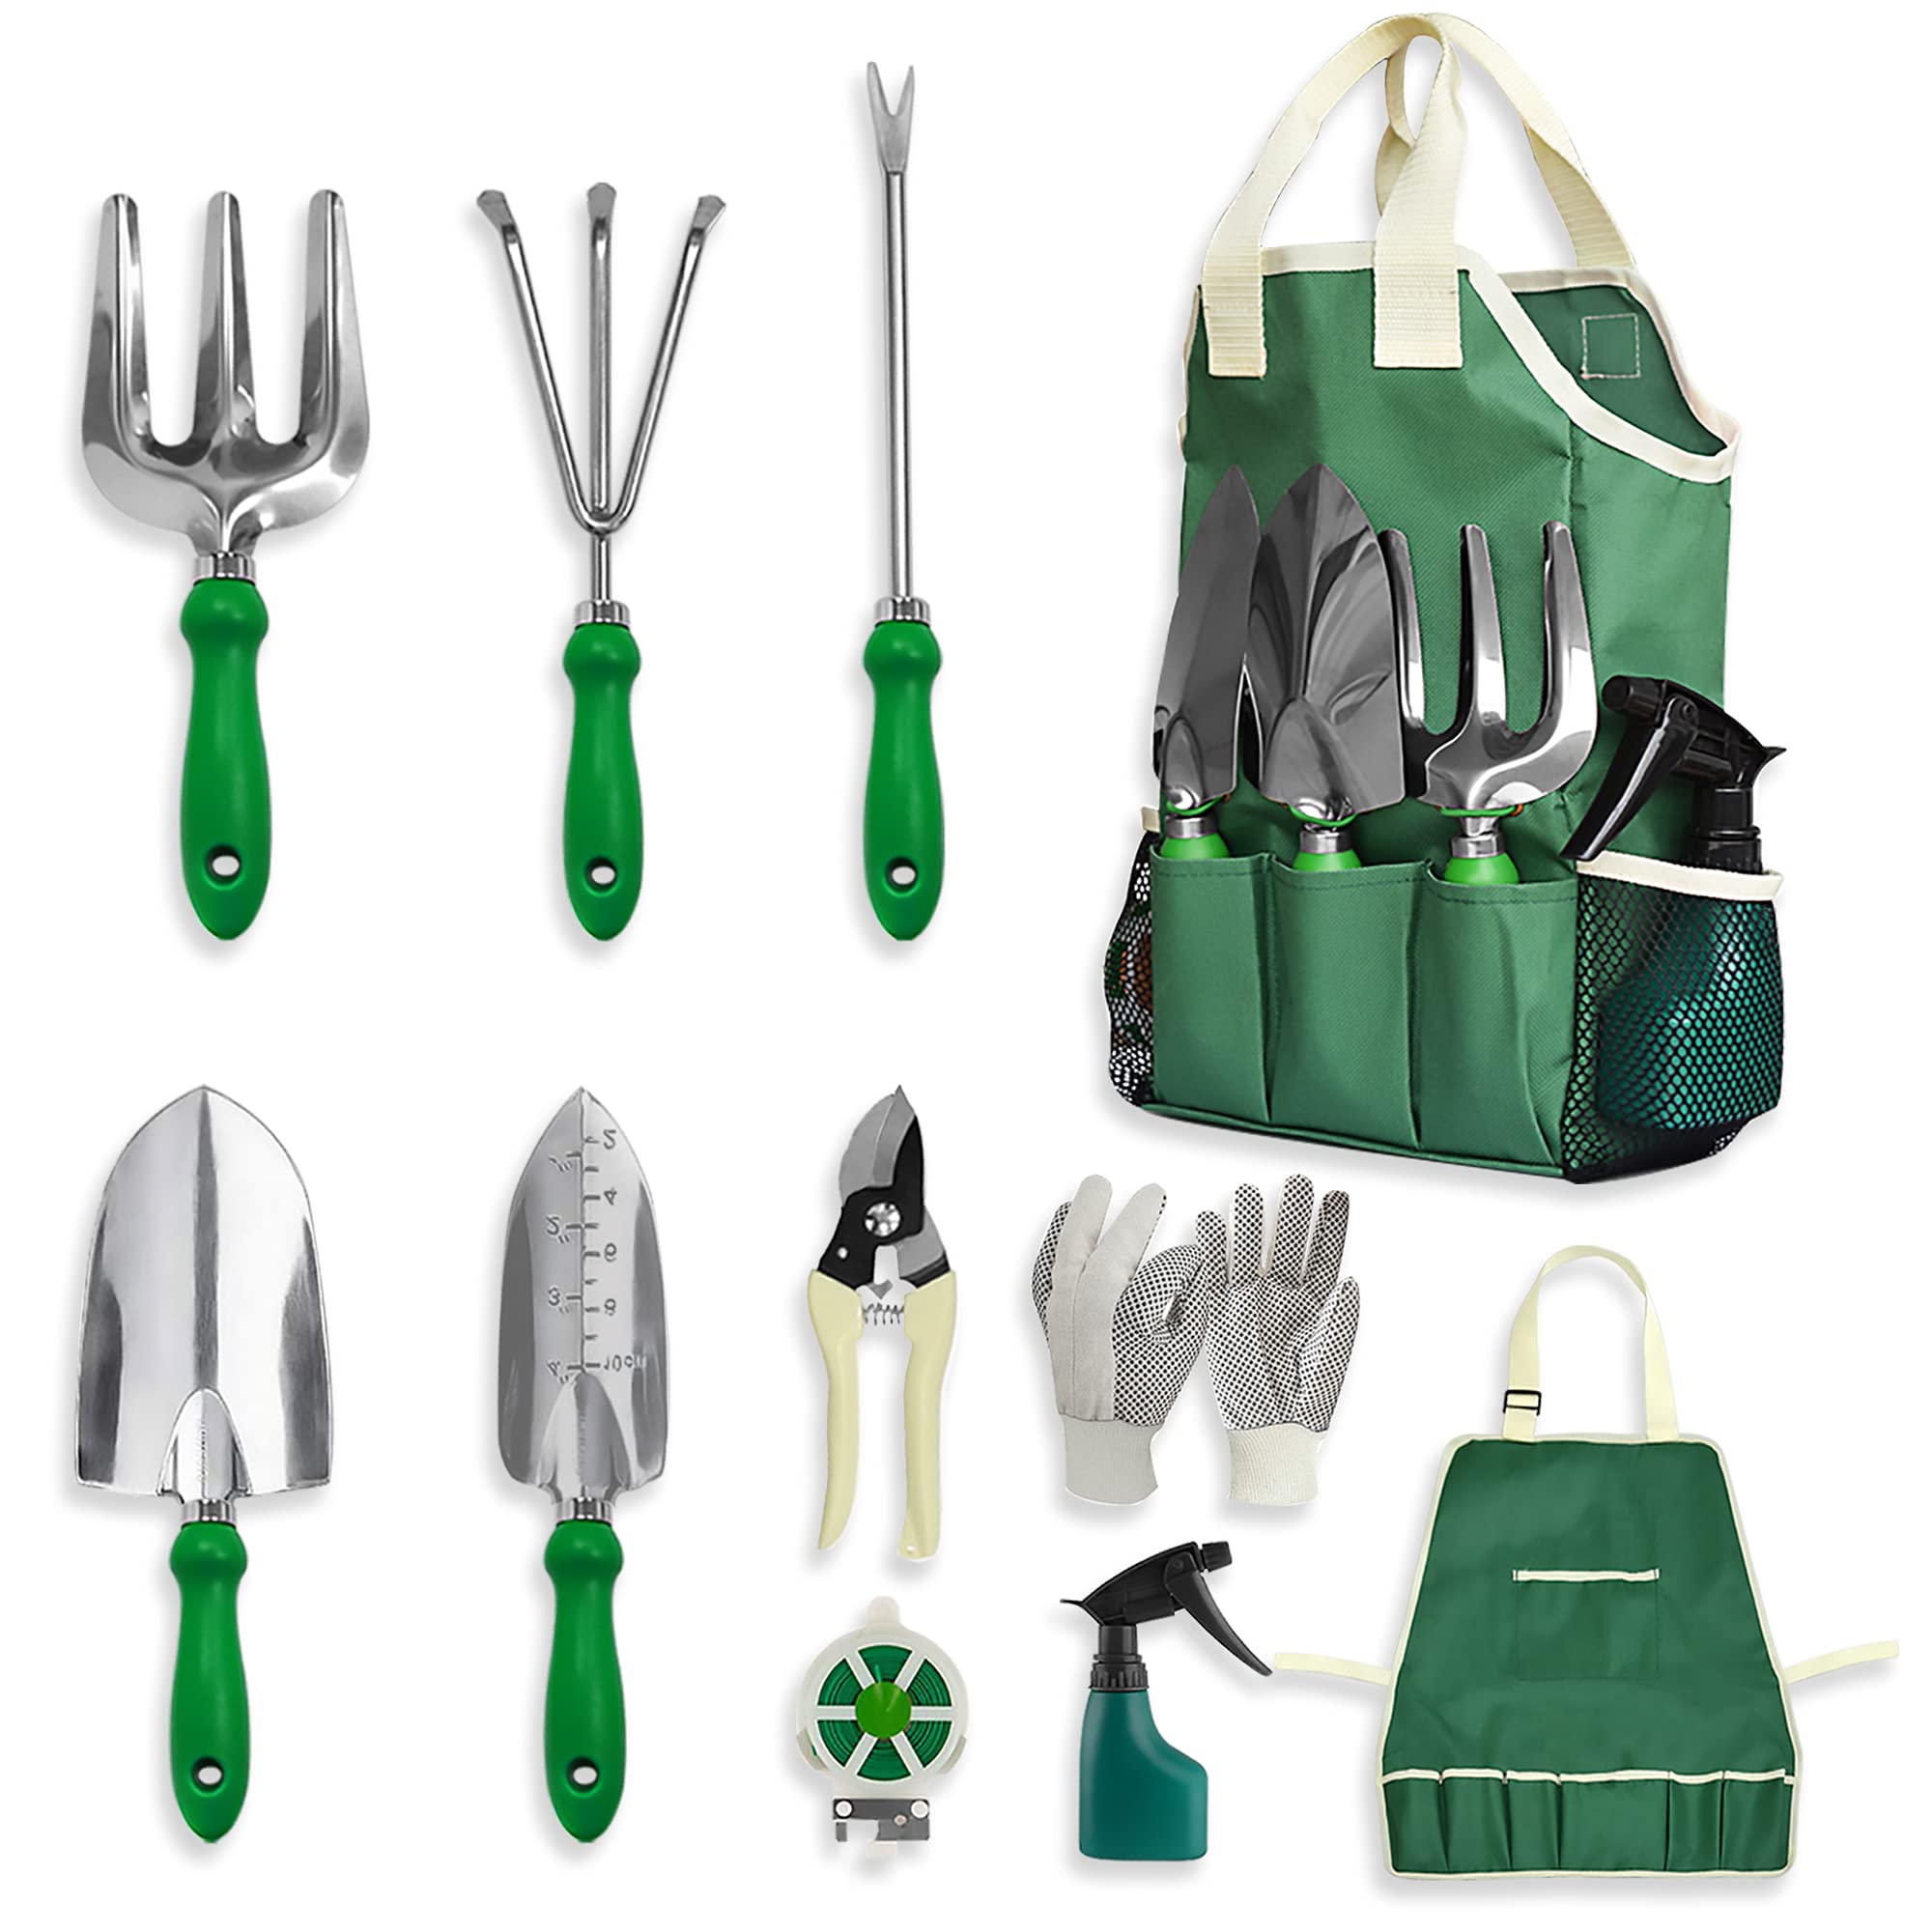 The Top Tools for Chinese Gardens